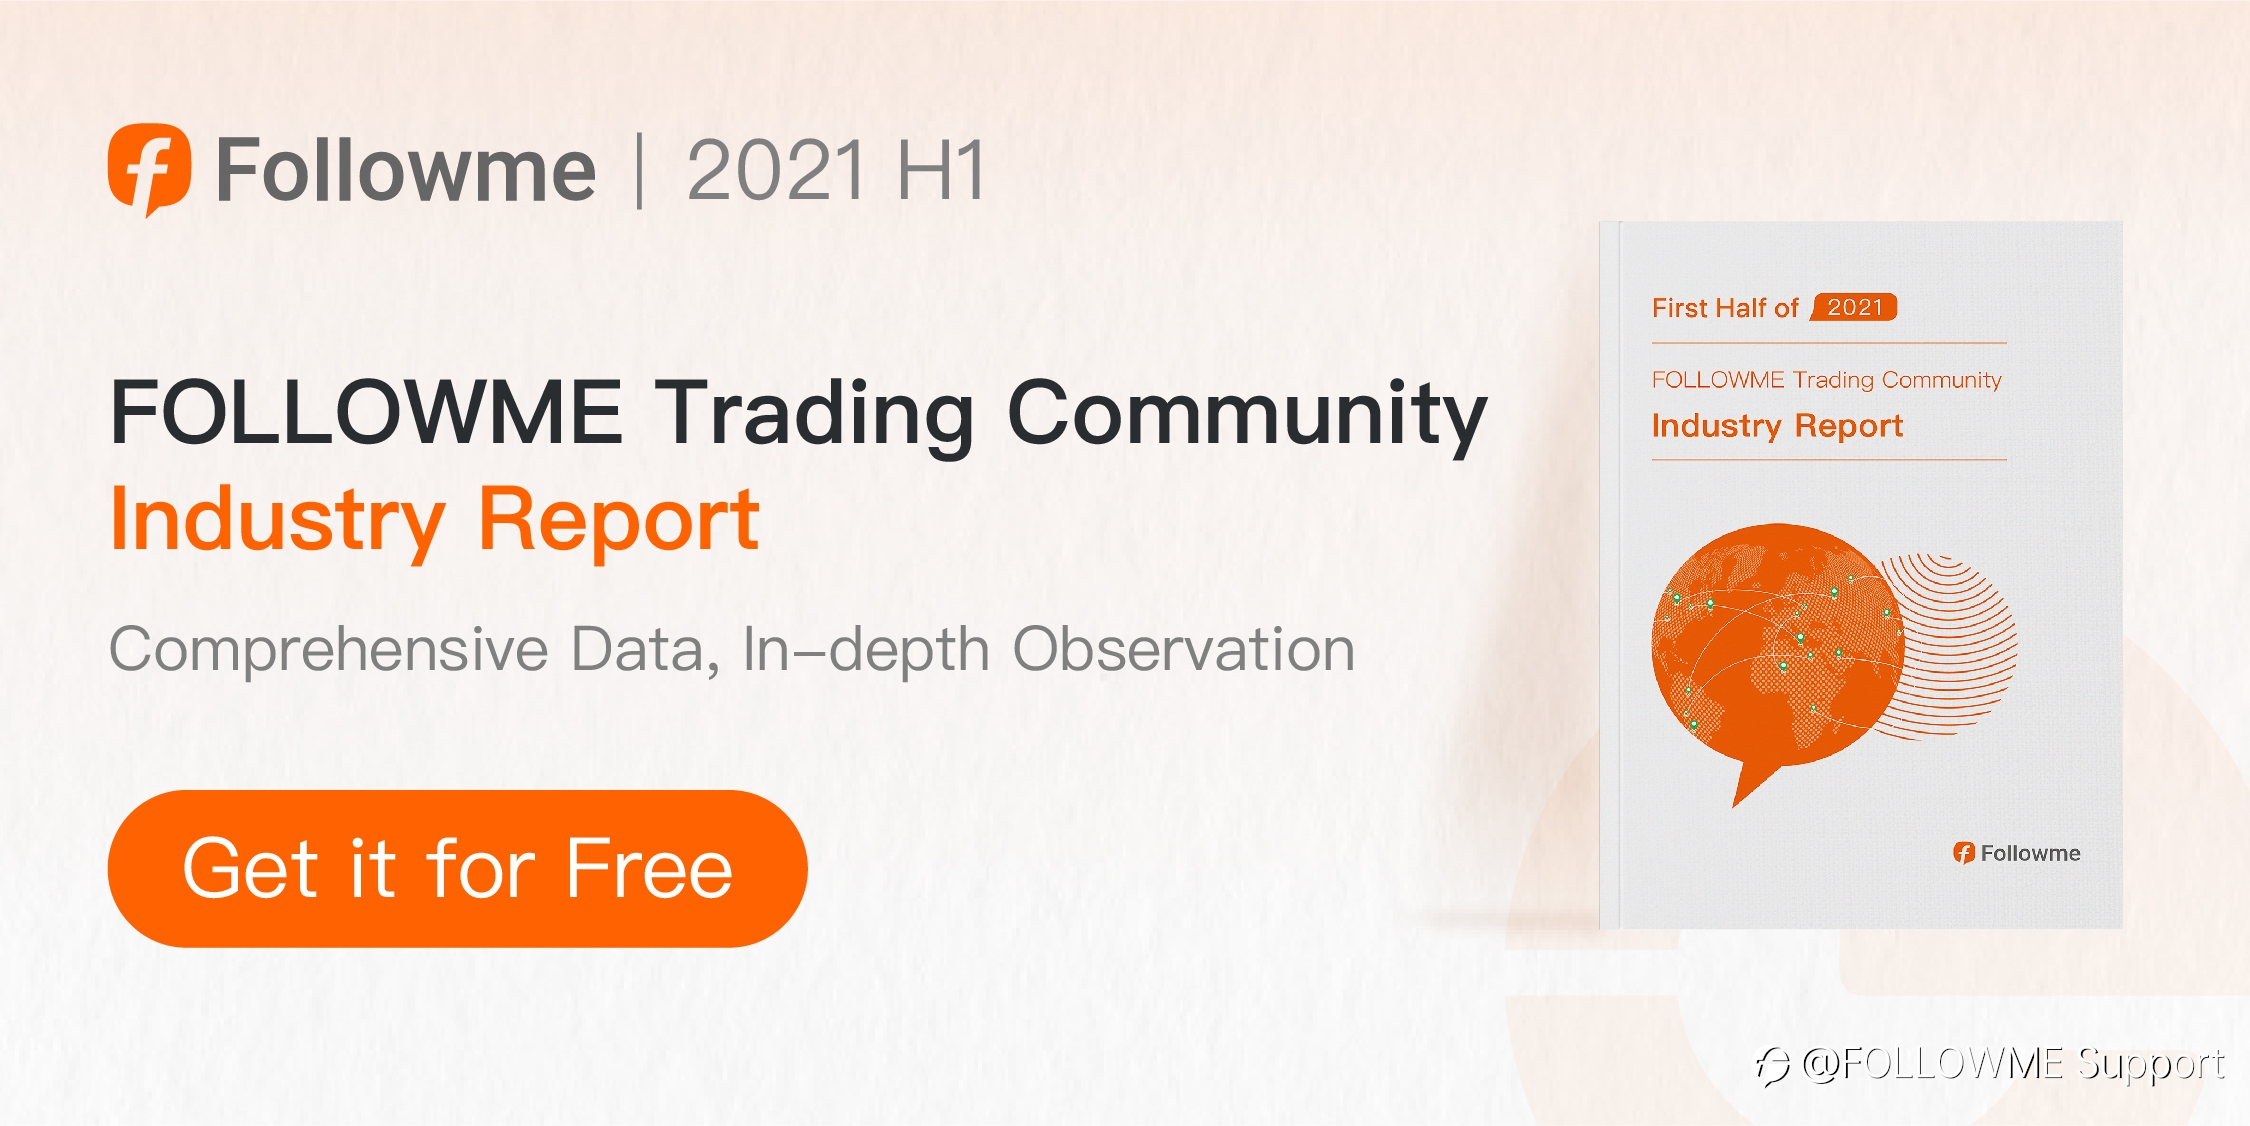 FOLLOWME Trading Community Industry Report for the first half of 2021